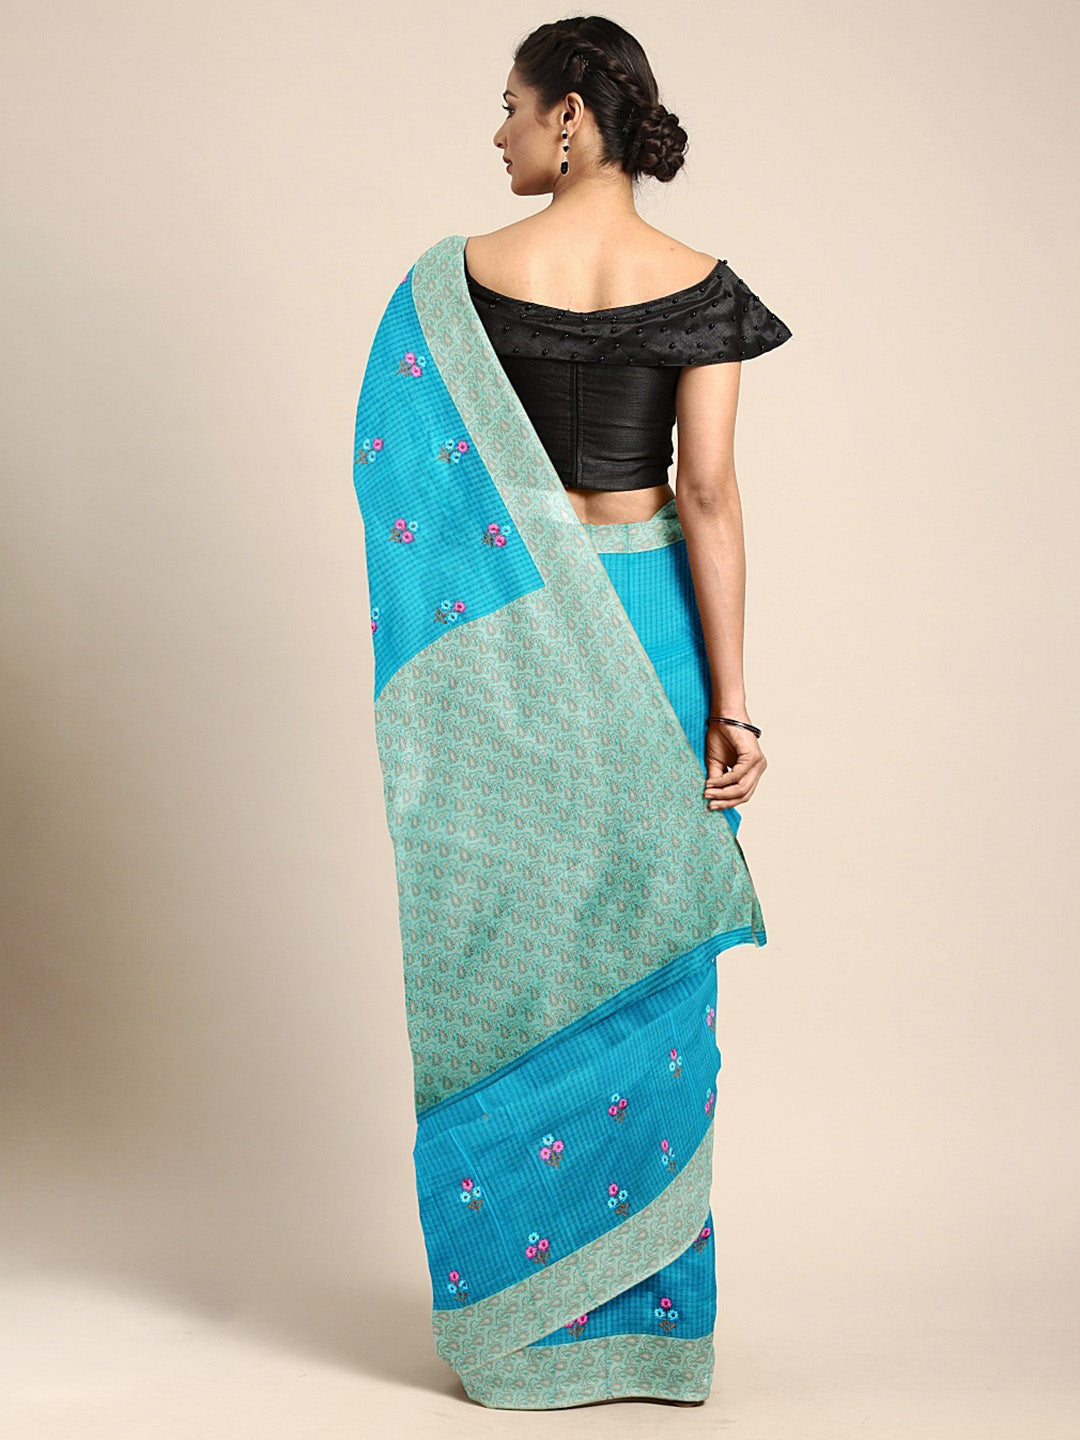 Neeru's Blue Embroidered Saree With Blouse